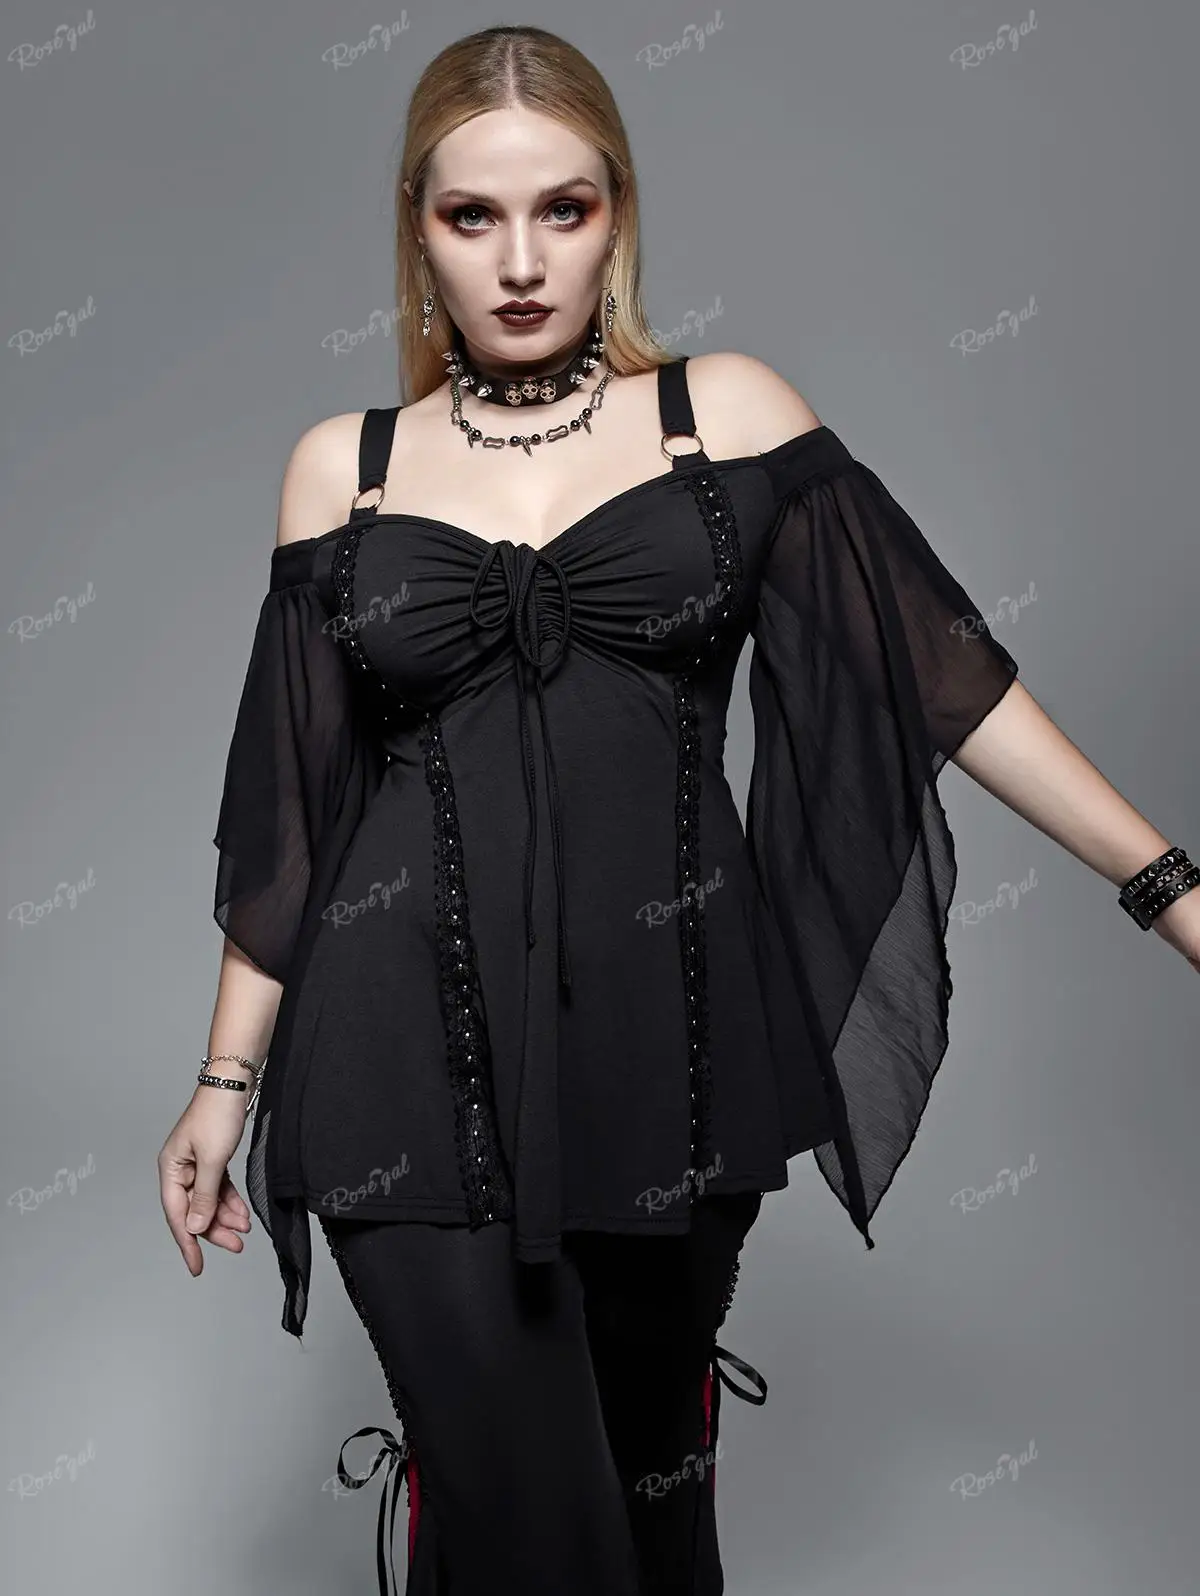 

ROSEGAL Plus Size Cinched Bell Sleeve Top Gothic Ruched Rings Cold Shoulder Studded T-Shirt For Women Black Tees 4XL